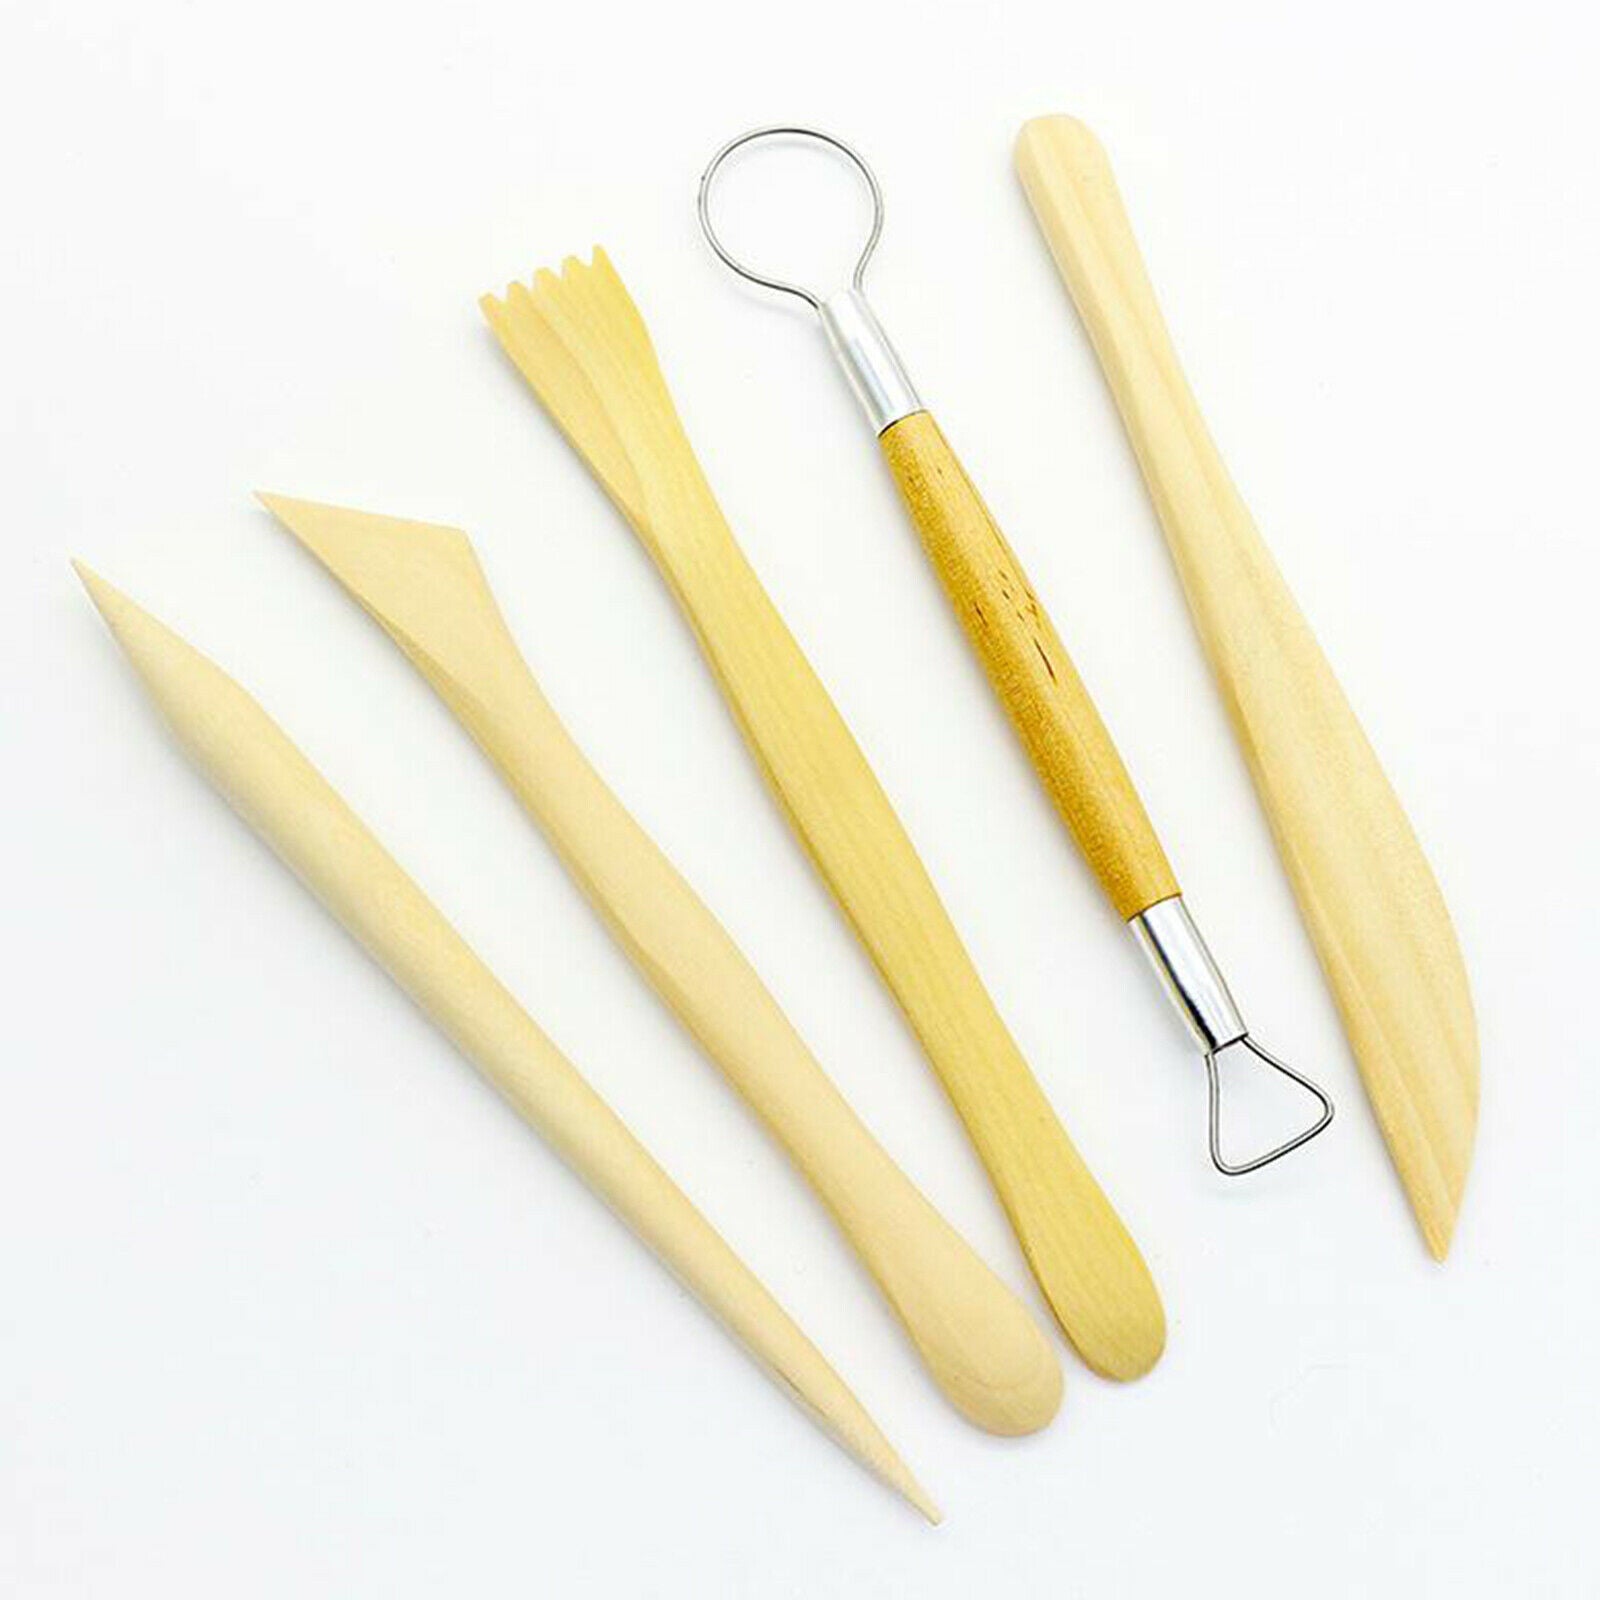 Pottery Tools, Clay Sculpting Tool Set, Modeling and Pottery Tools Kit, for